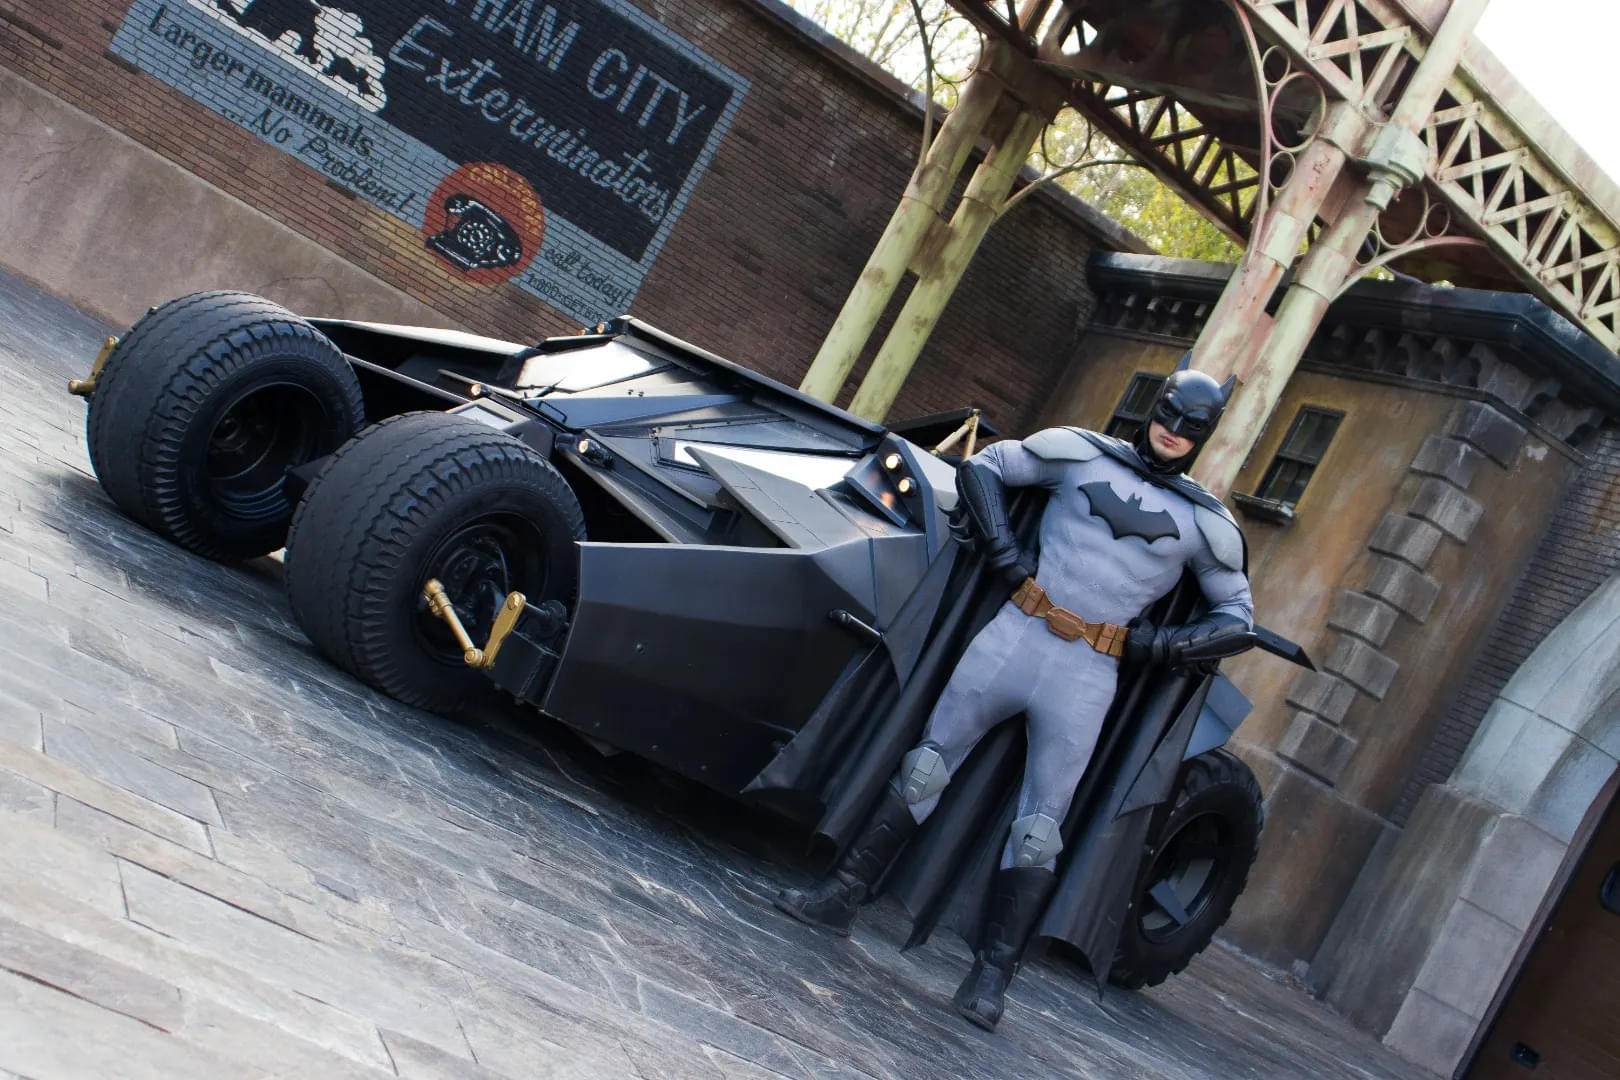 Attend the famous Batman show performed every day in the park